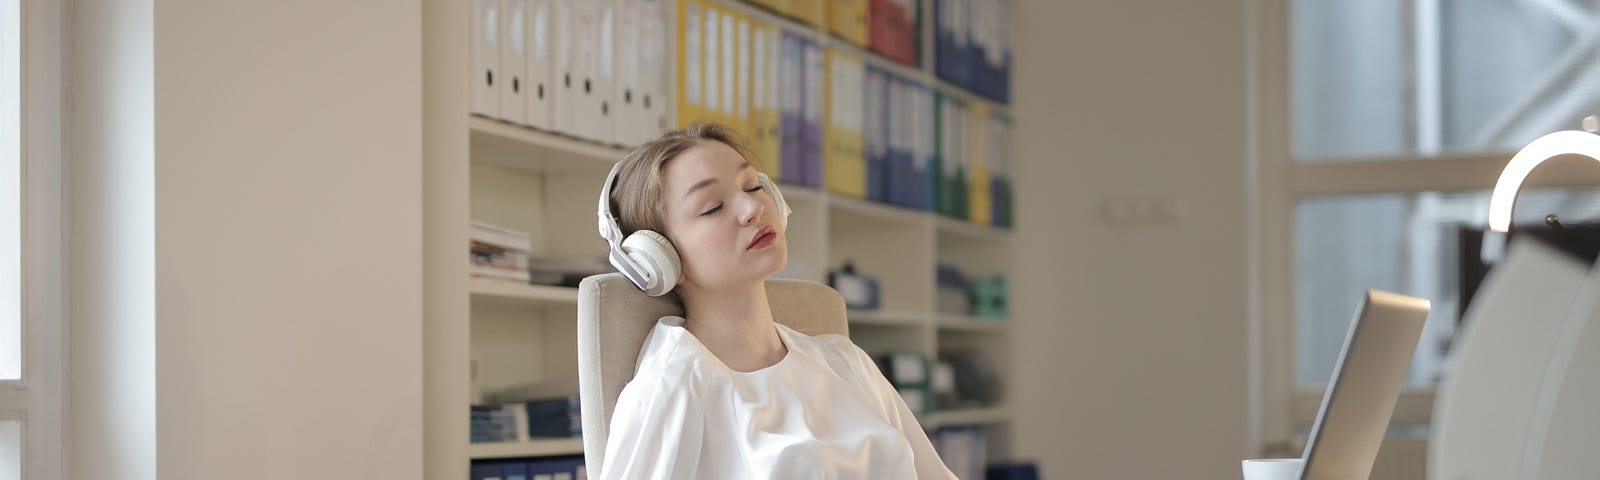 woman with headphones on snoozes in front of her desk.